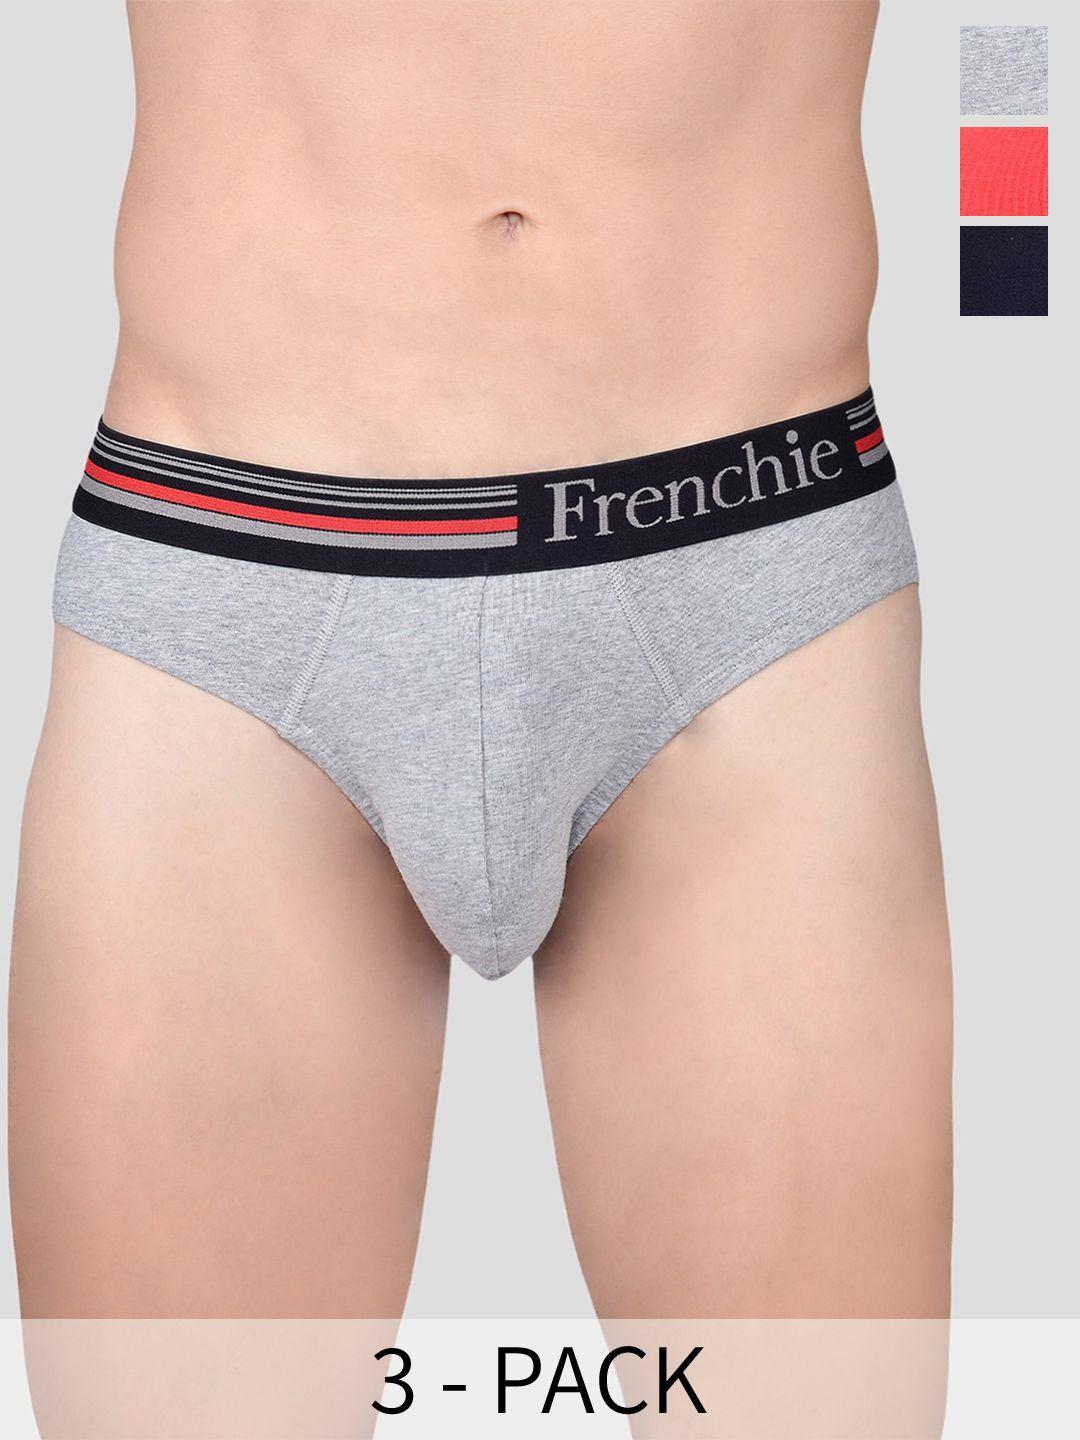 frenchie-pack-of-3-assorted-pure-cotton-briefs-casuals_4000_po3_s